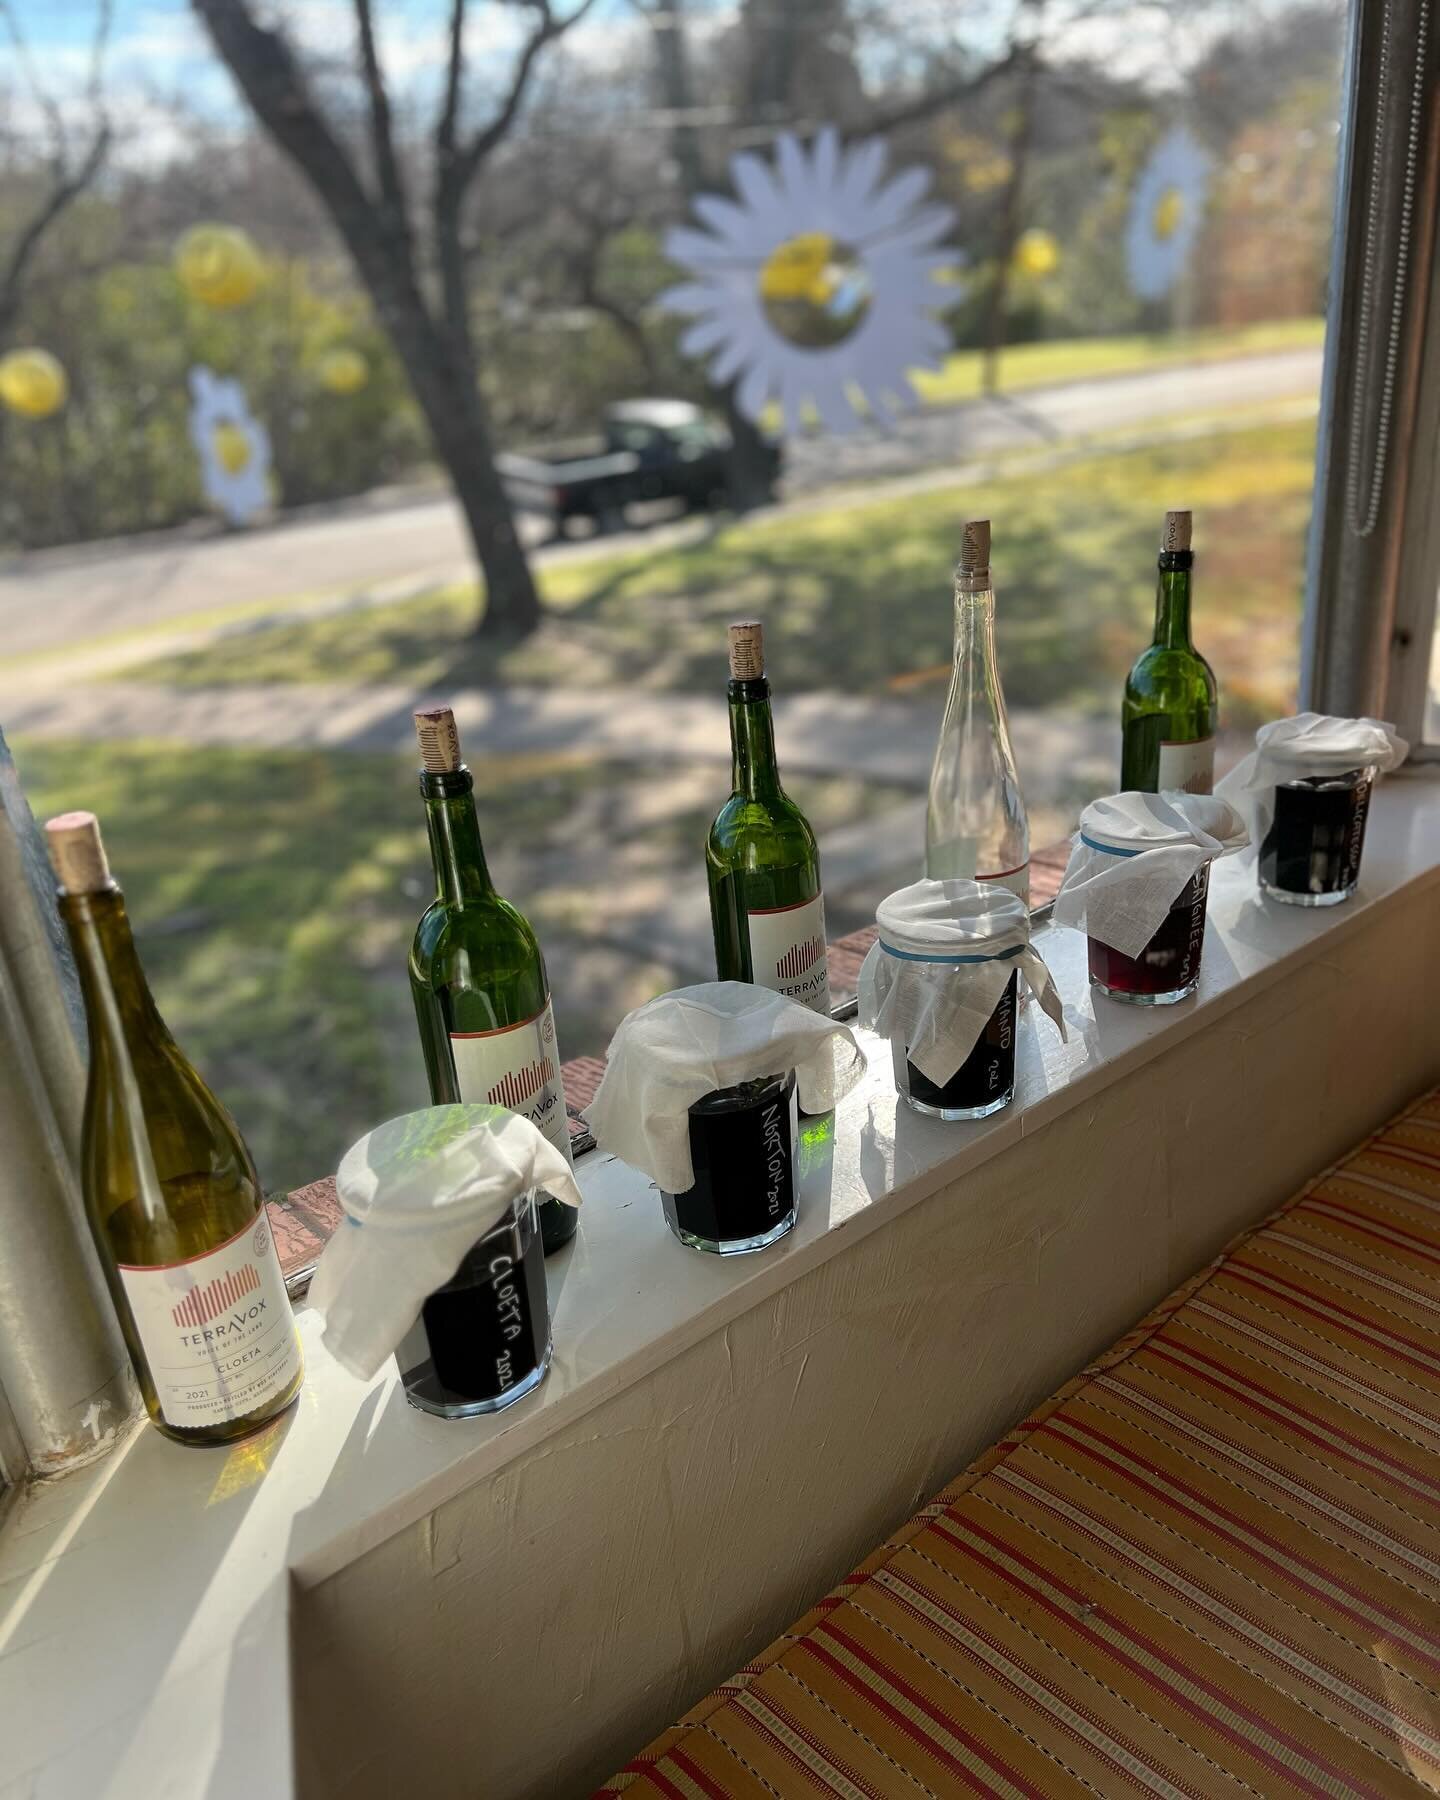 Vinegar Trials
.
Culinary Director @ericnystrom doing some Vinegar trials with five varietals of native American grapes. We will be experimenting with cultivating these amazing historic grape varietals, and will adventure with you into making our own